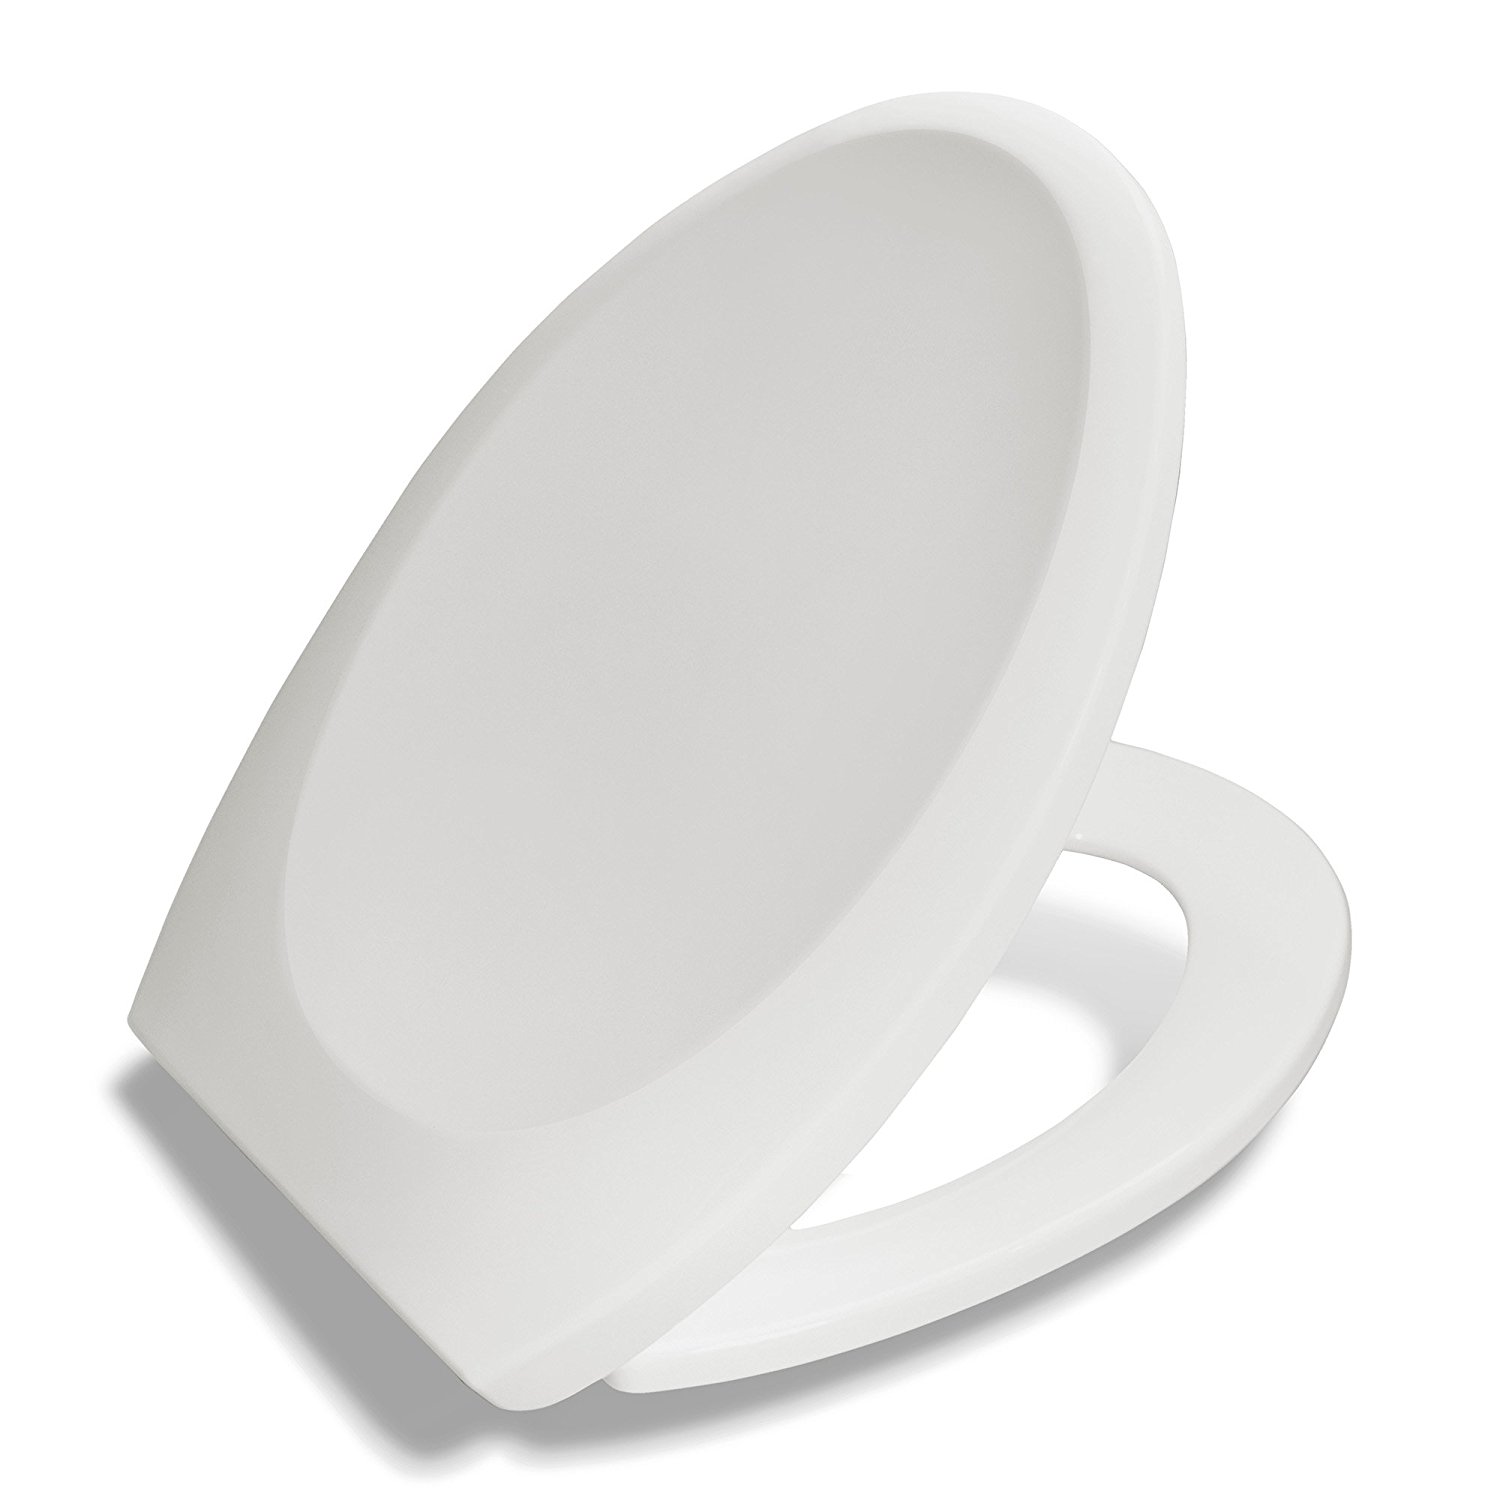 Bath Royale Premium Elongated Toilet Seat with Cover, White - Slow Close, Quick Release for Easy Cleaning. Fits All Elongated (Oval) Toilets